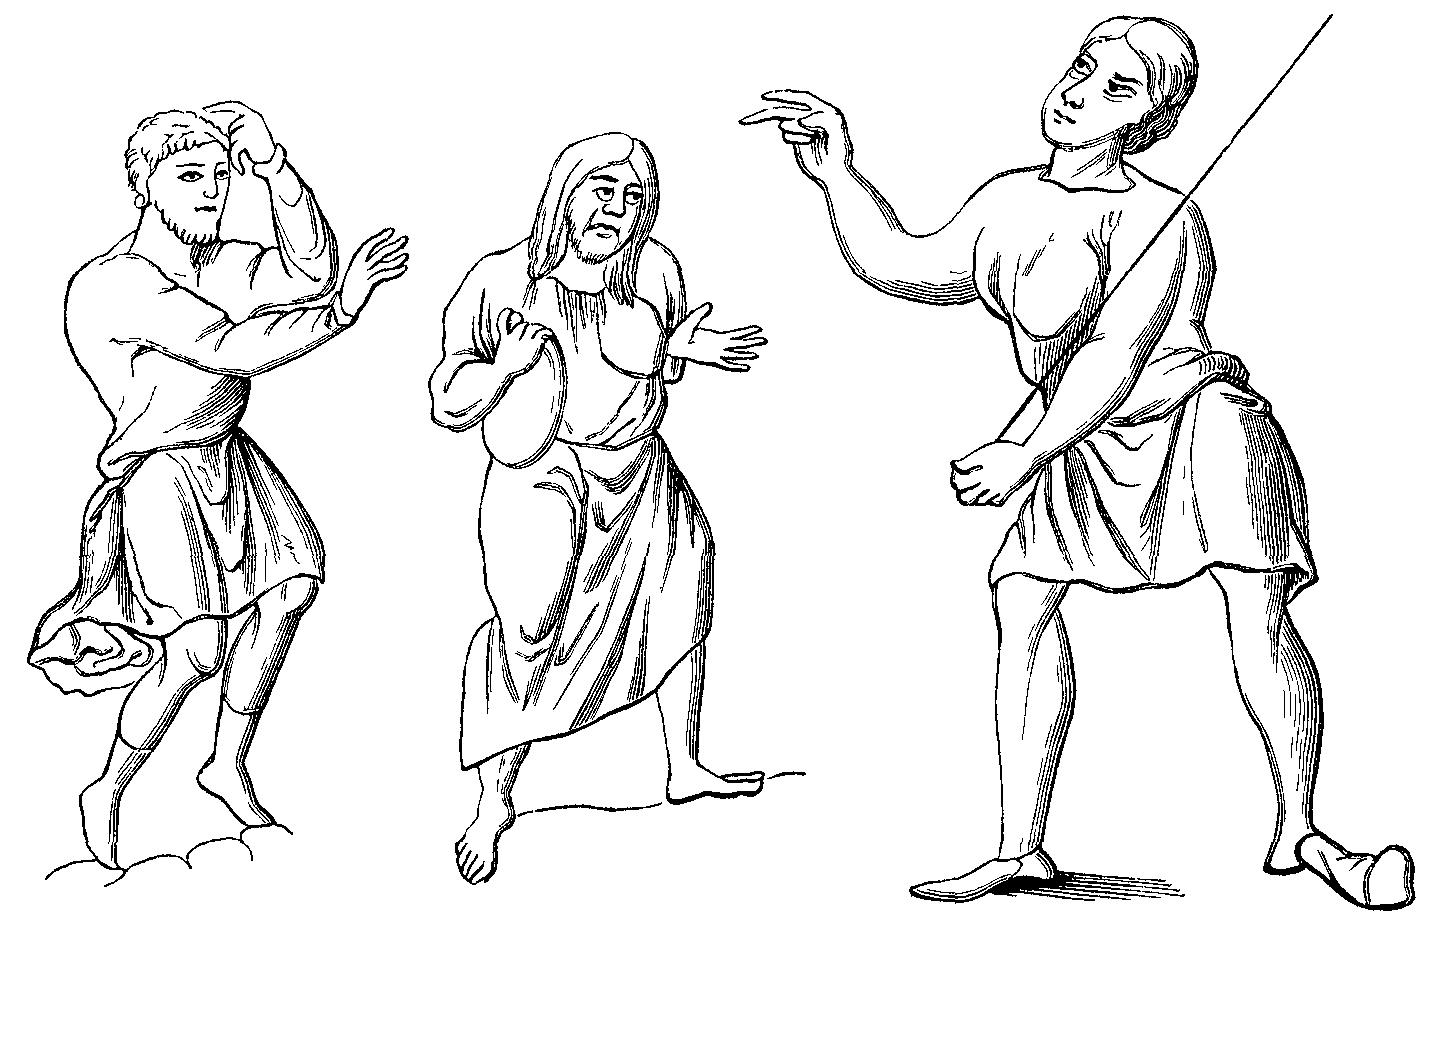 Costumes of Slaves or Serfs, from the Sixth to the Twelfth Centuries, collected by H. de Vielcastel, from original Documents in the great Libraries of Europe. Project Gutenberg text 10940).